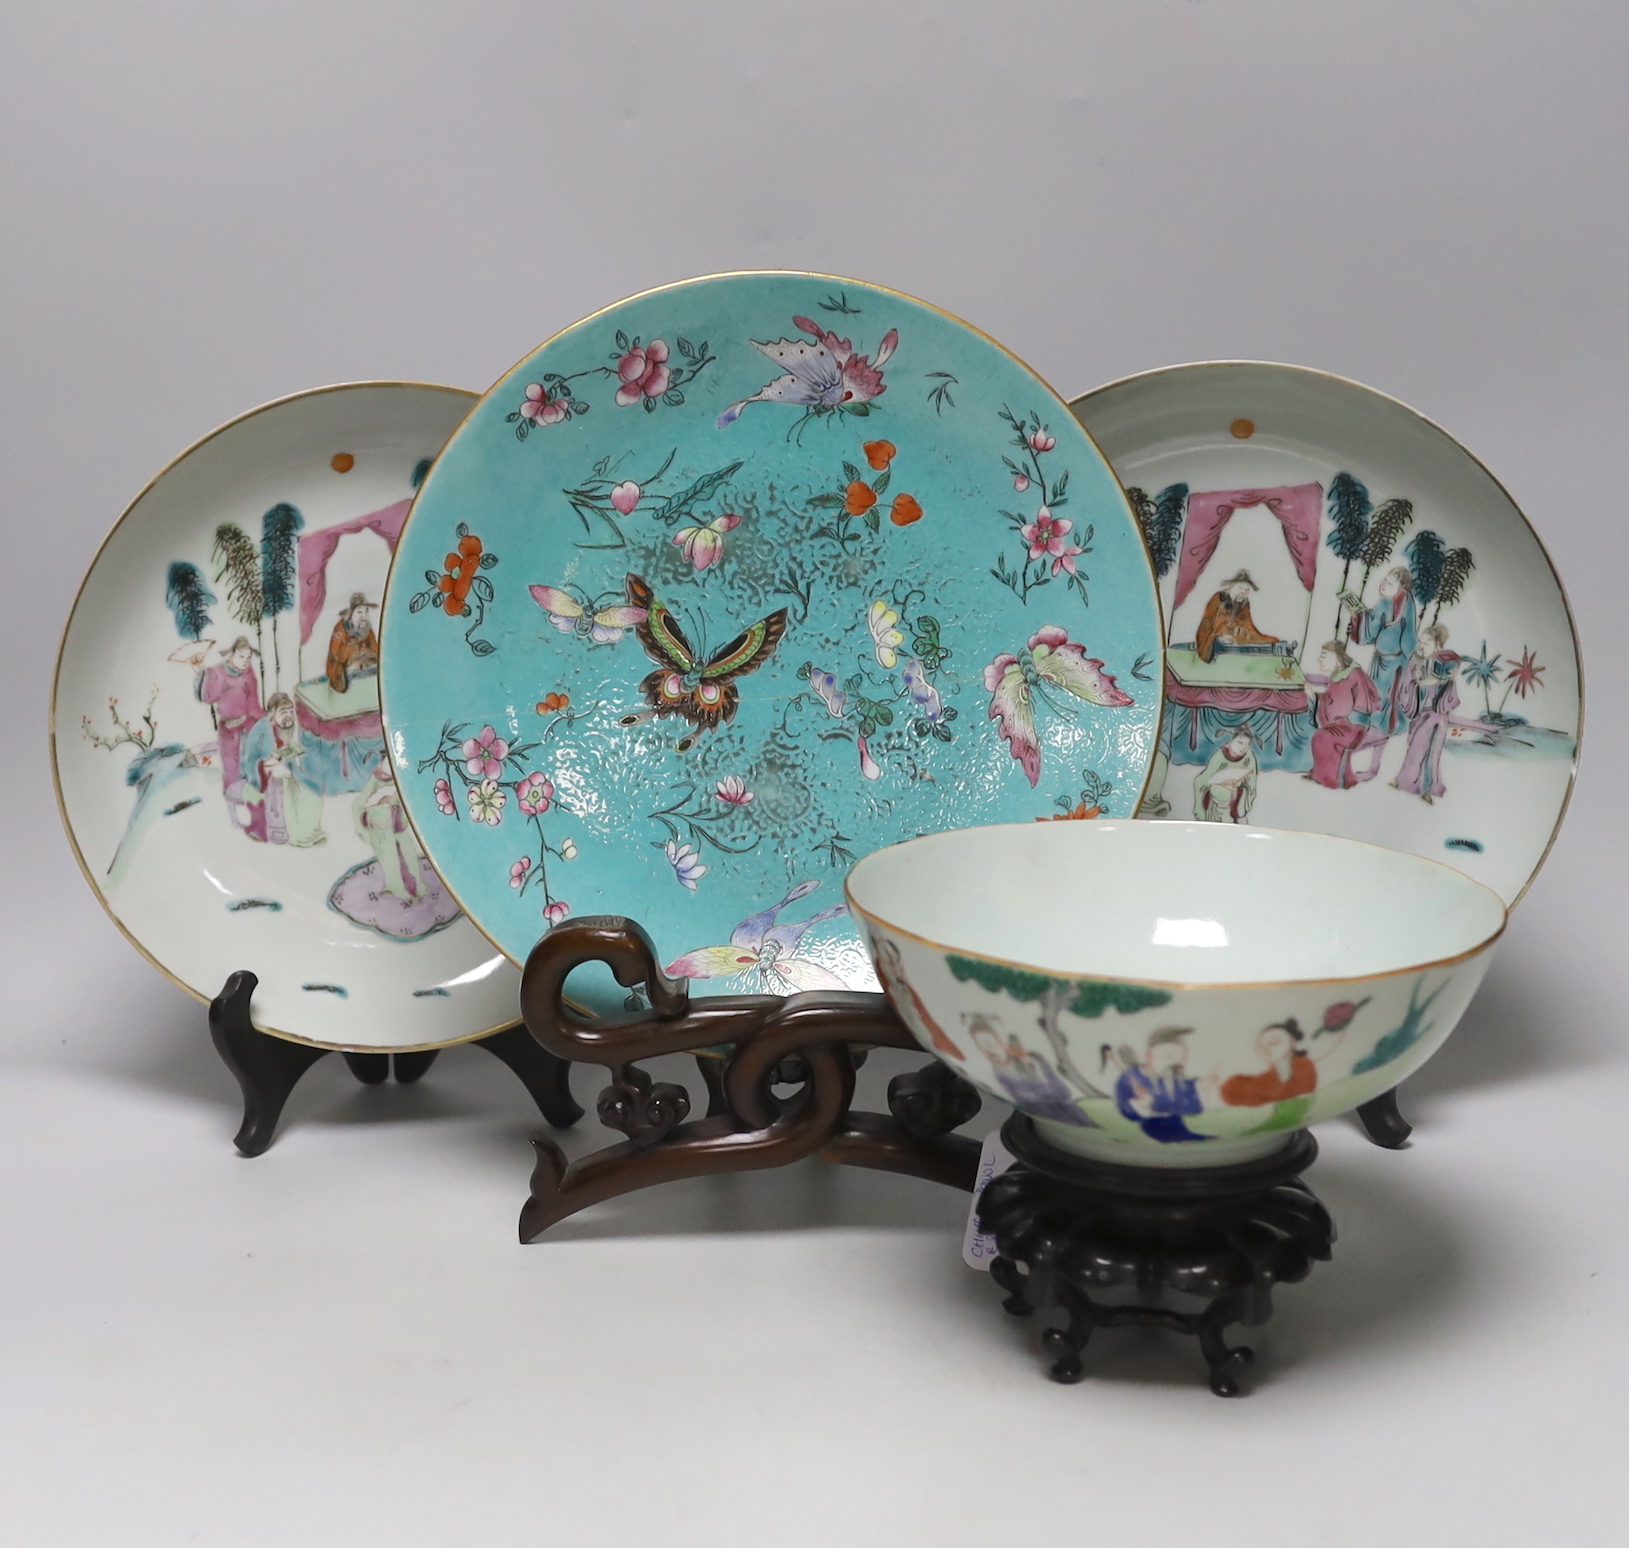 A pair of Chinese famille rose dishes painted with court scenes, a similar enamelled butterfly dish and an ‘immortals’ bowl, all 19th century